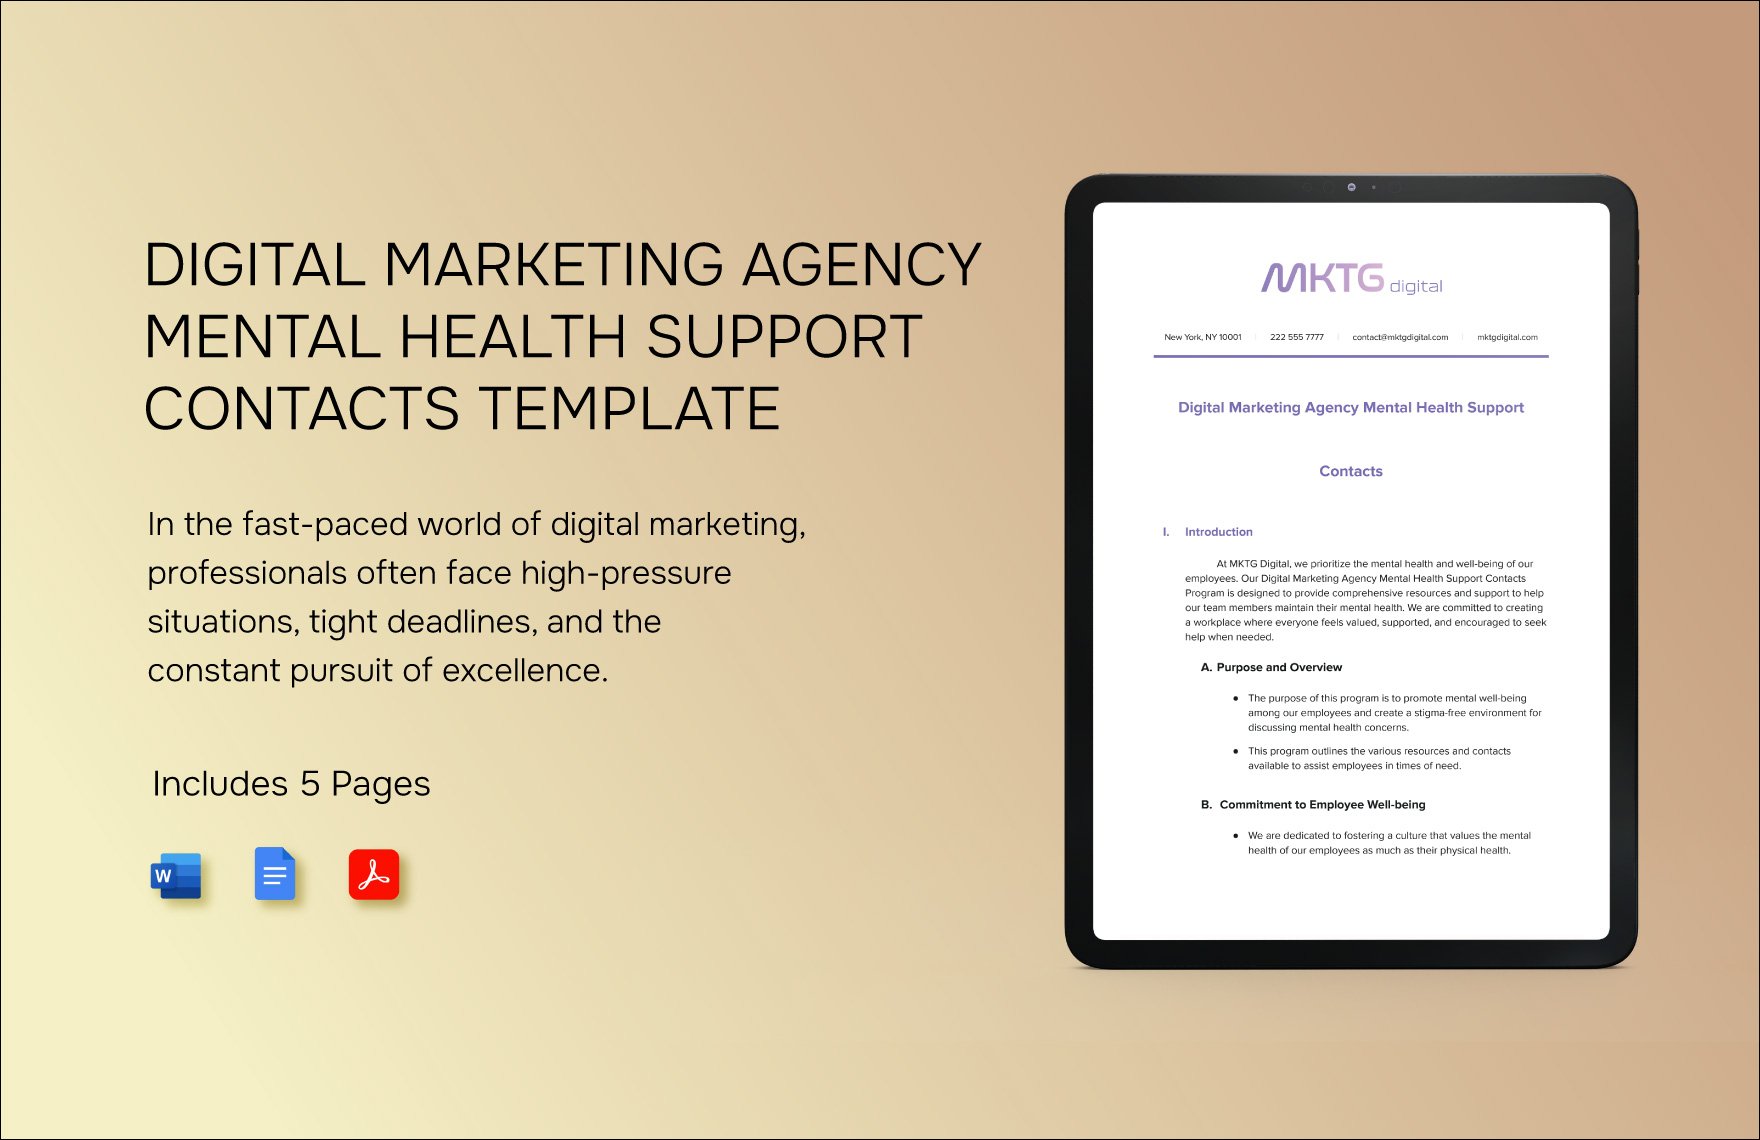 Digital Marketing Agency Mental Health Support Contacts Template in Word, Google Docs, PDF